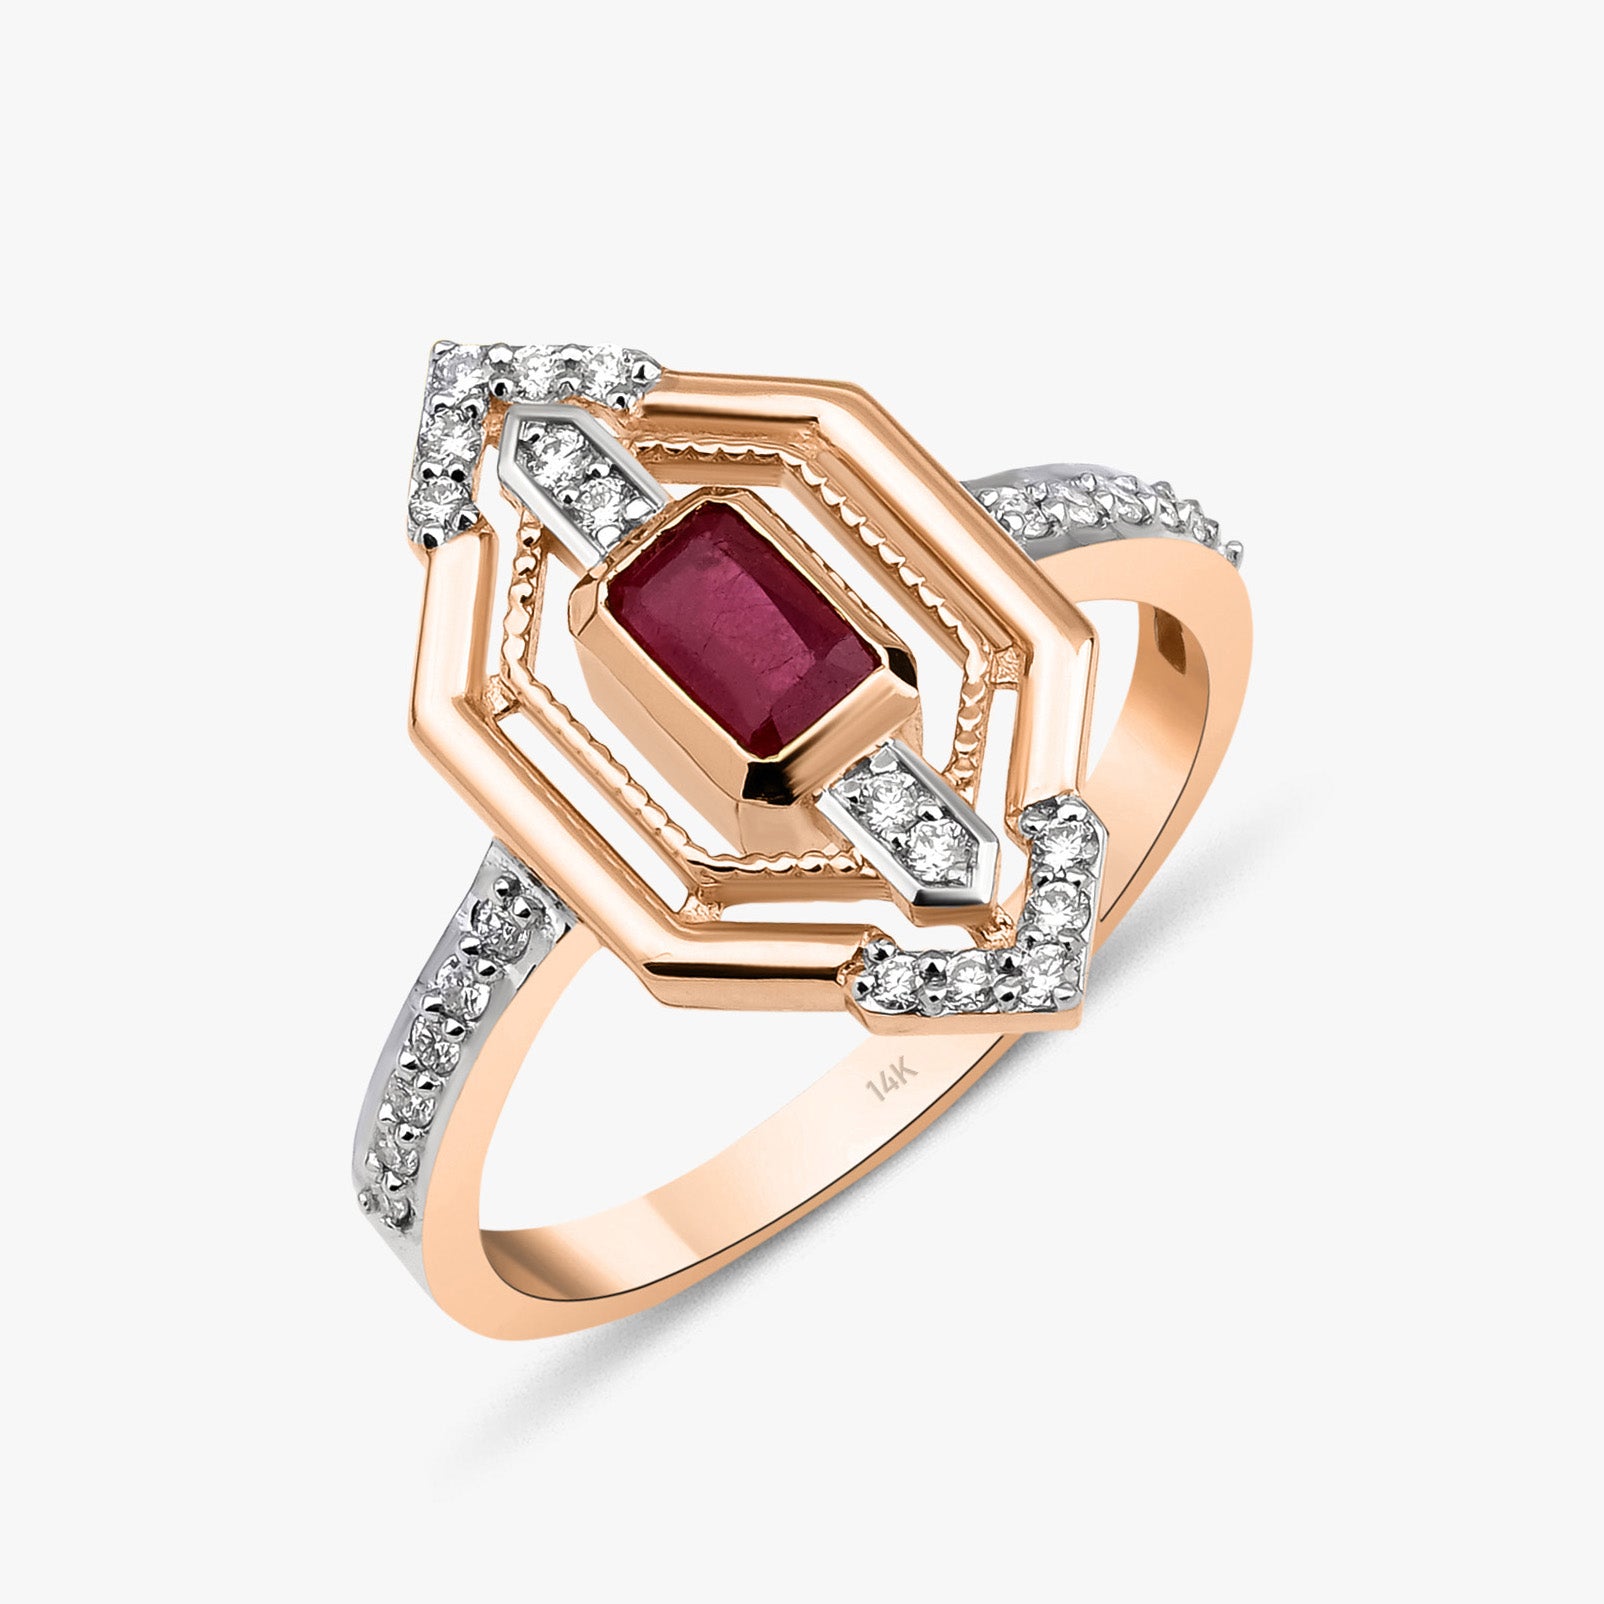 Emerald Cut Ruby and Diamond Ring in 14K Gold